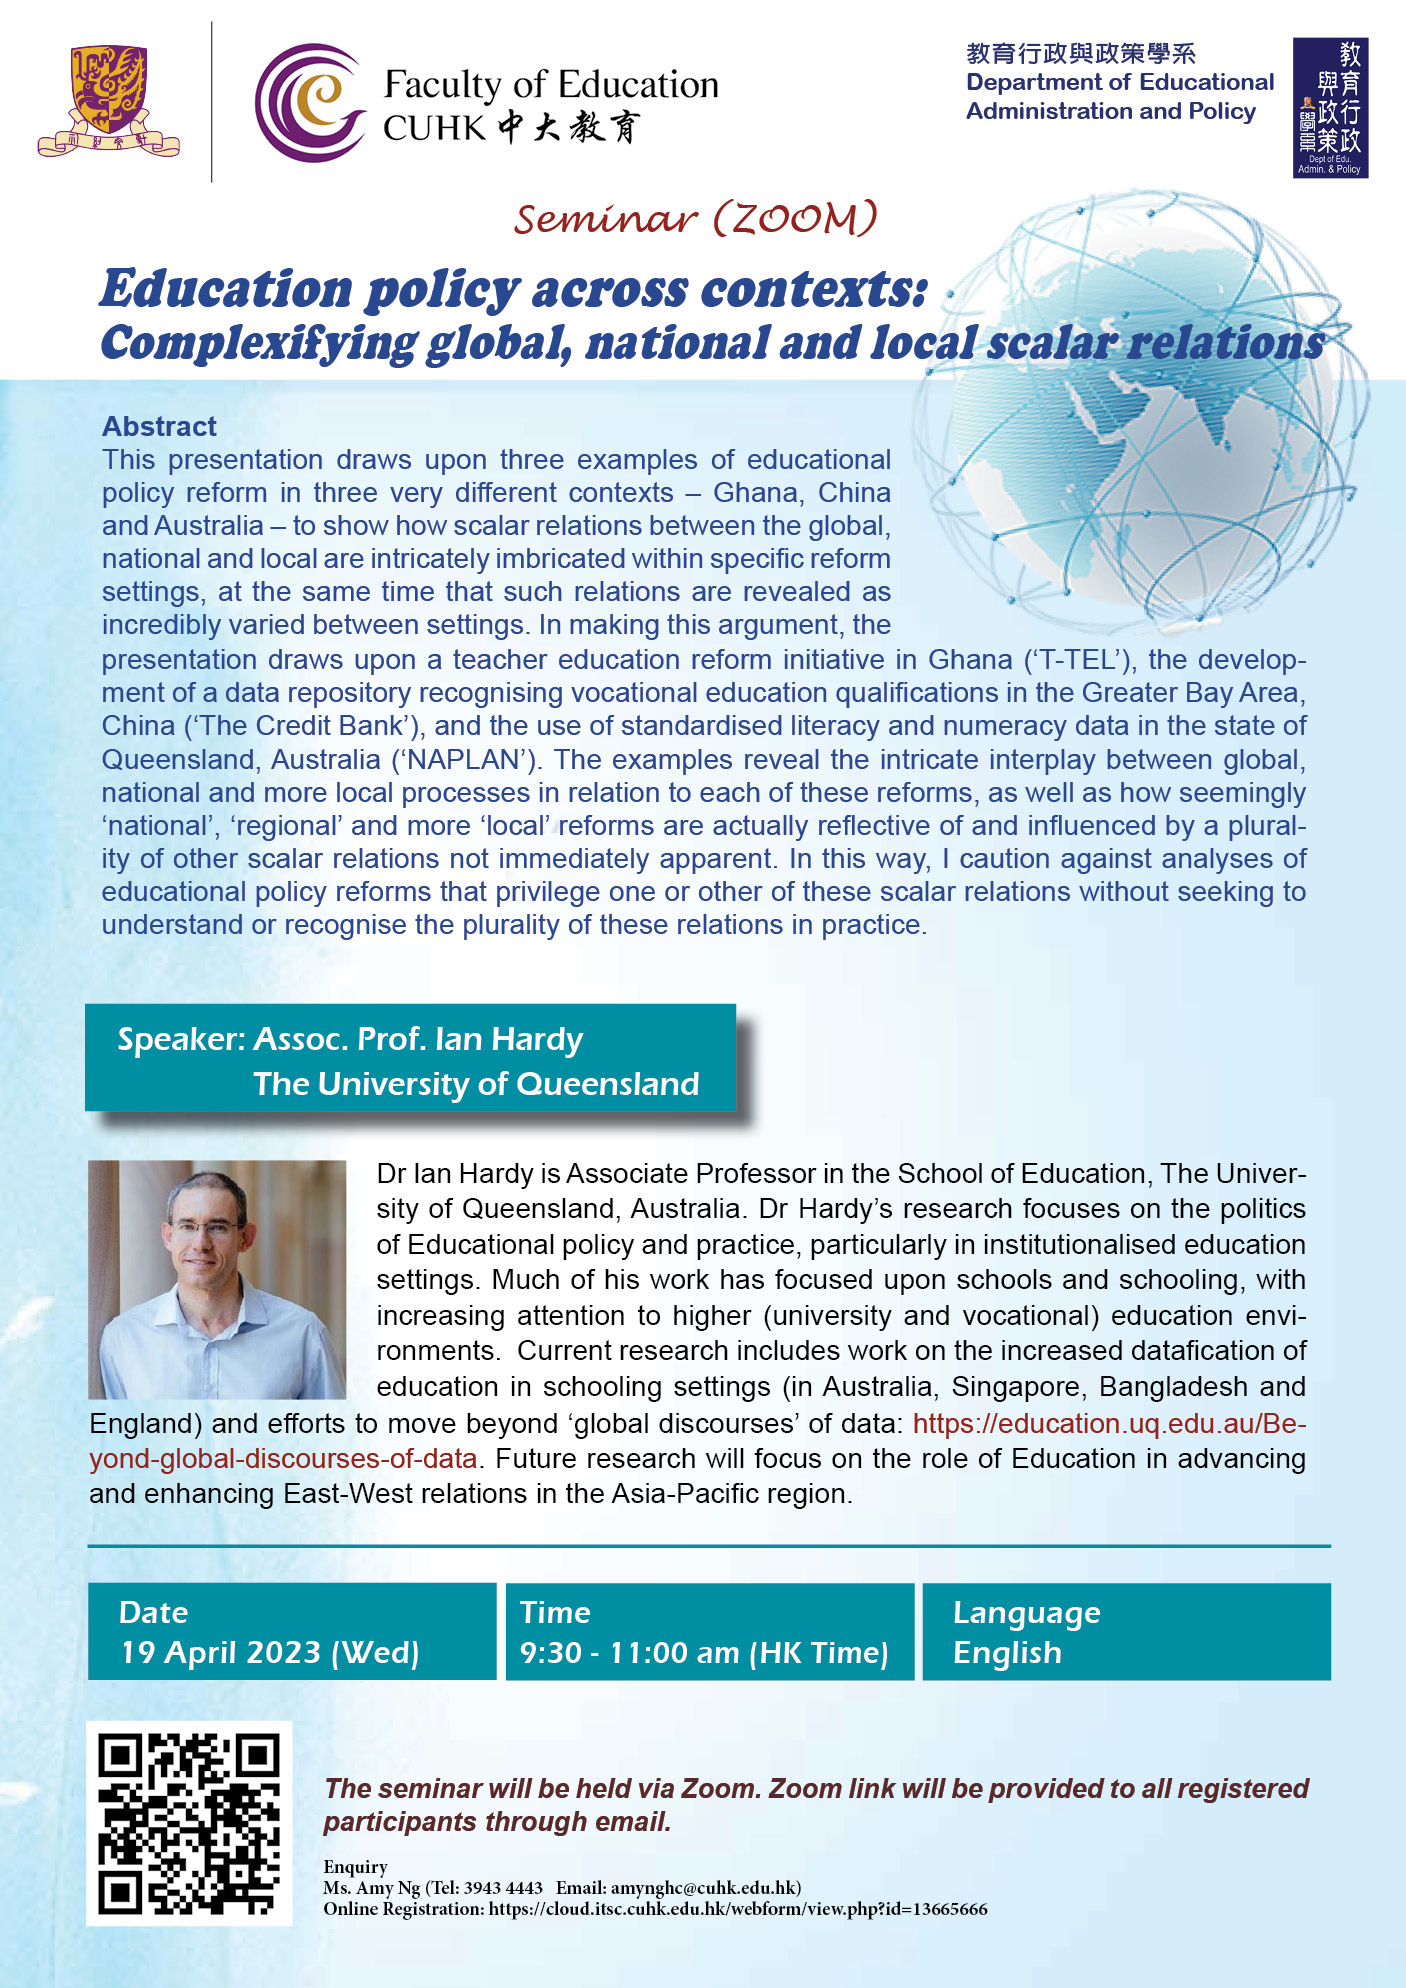 Education policy across contexts: Complexifying global, national and local scalar relations